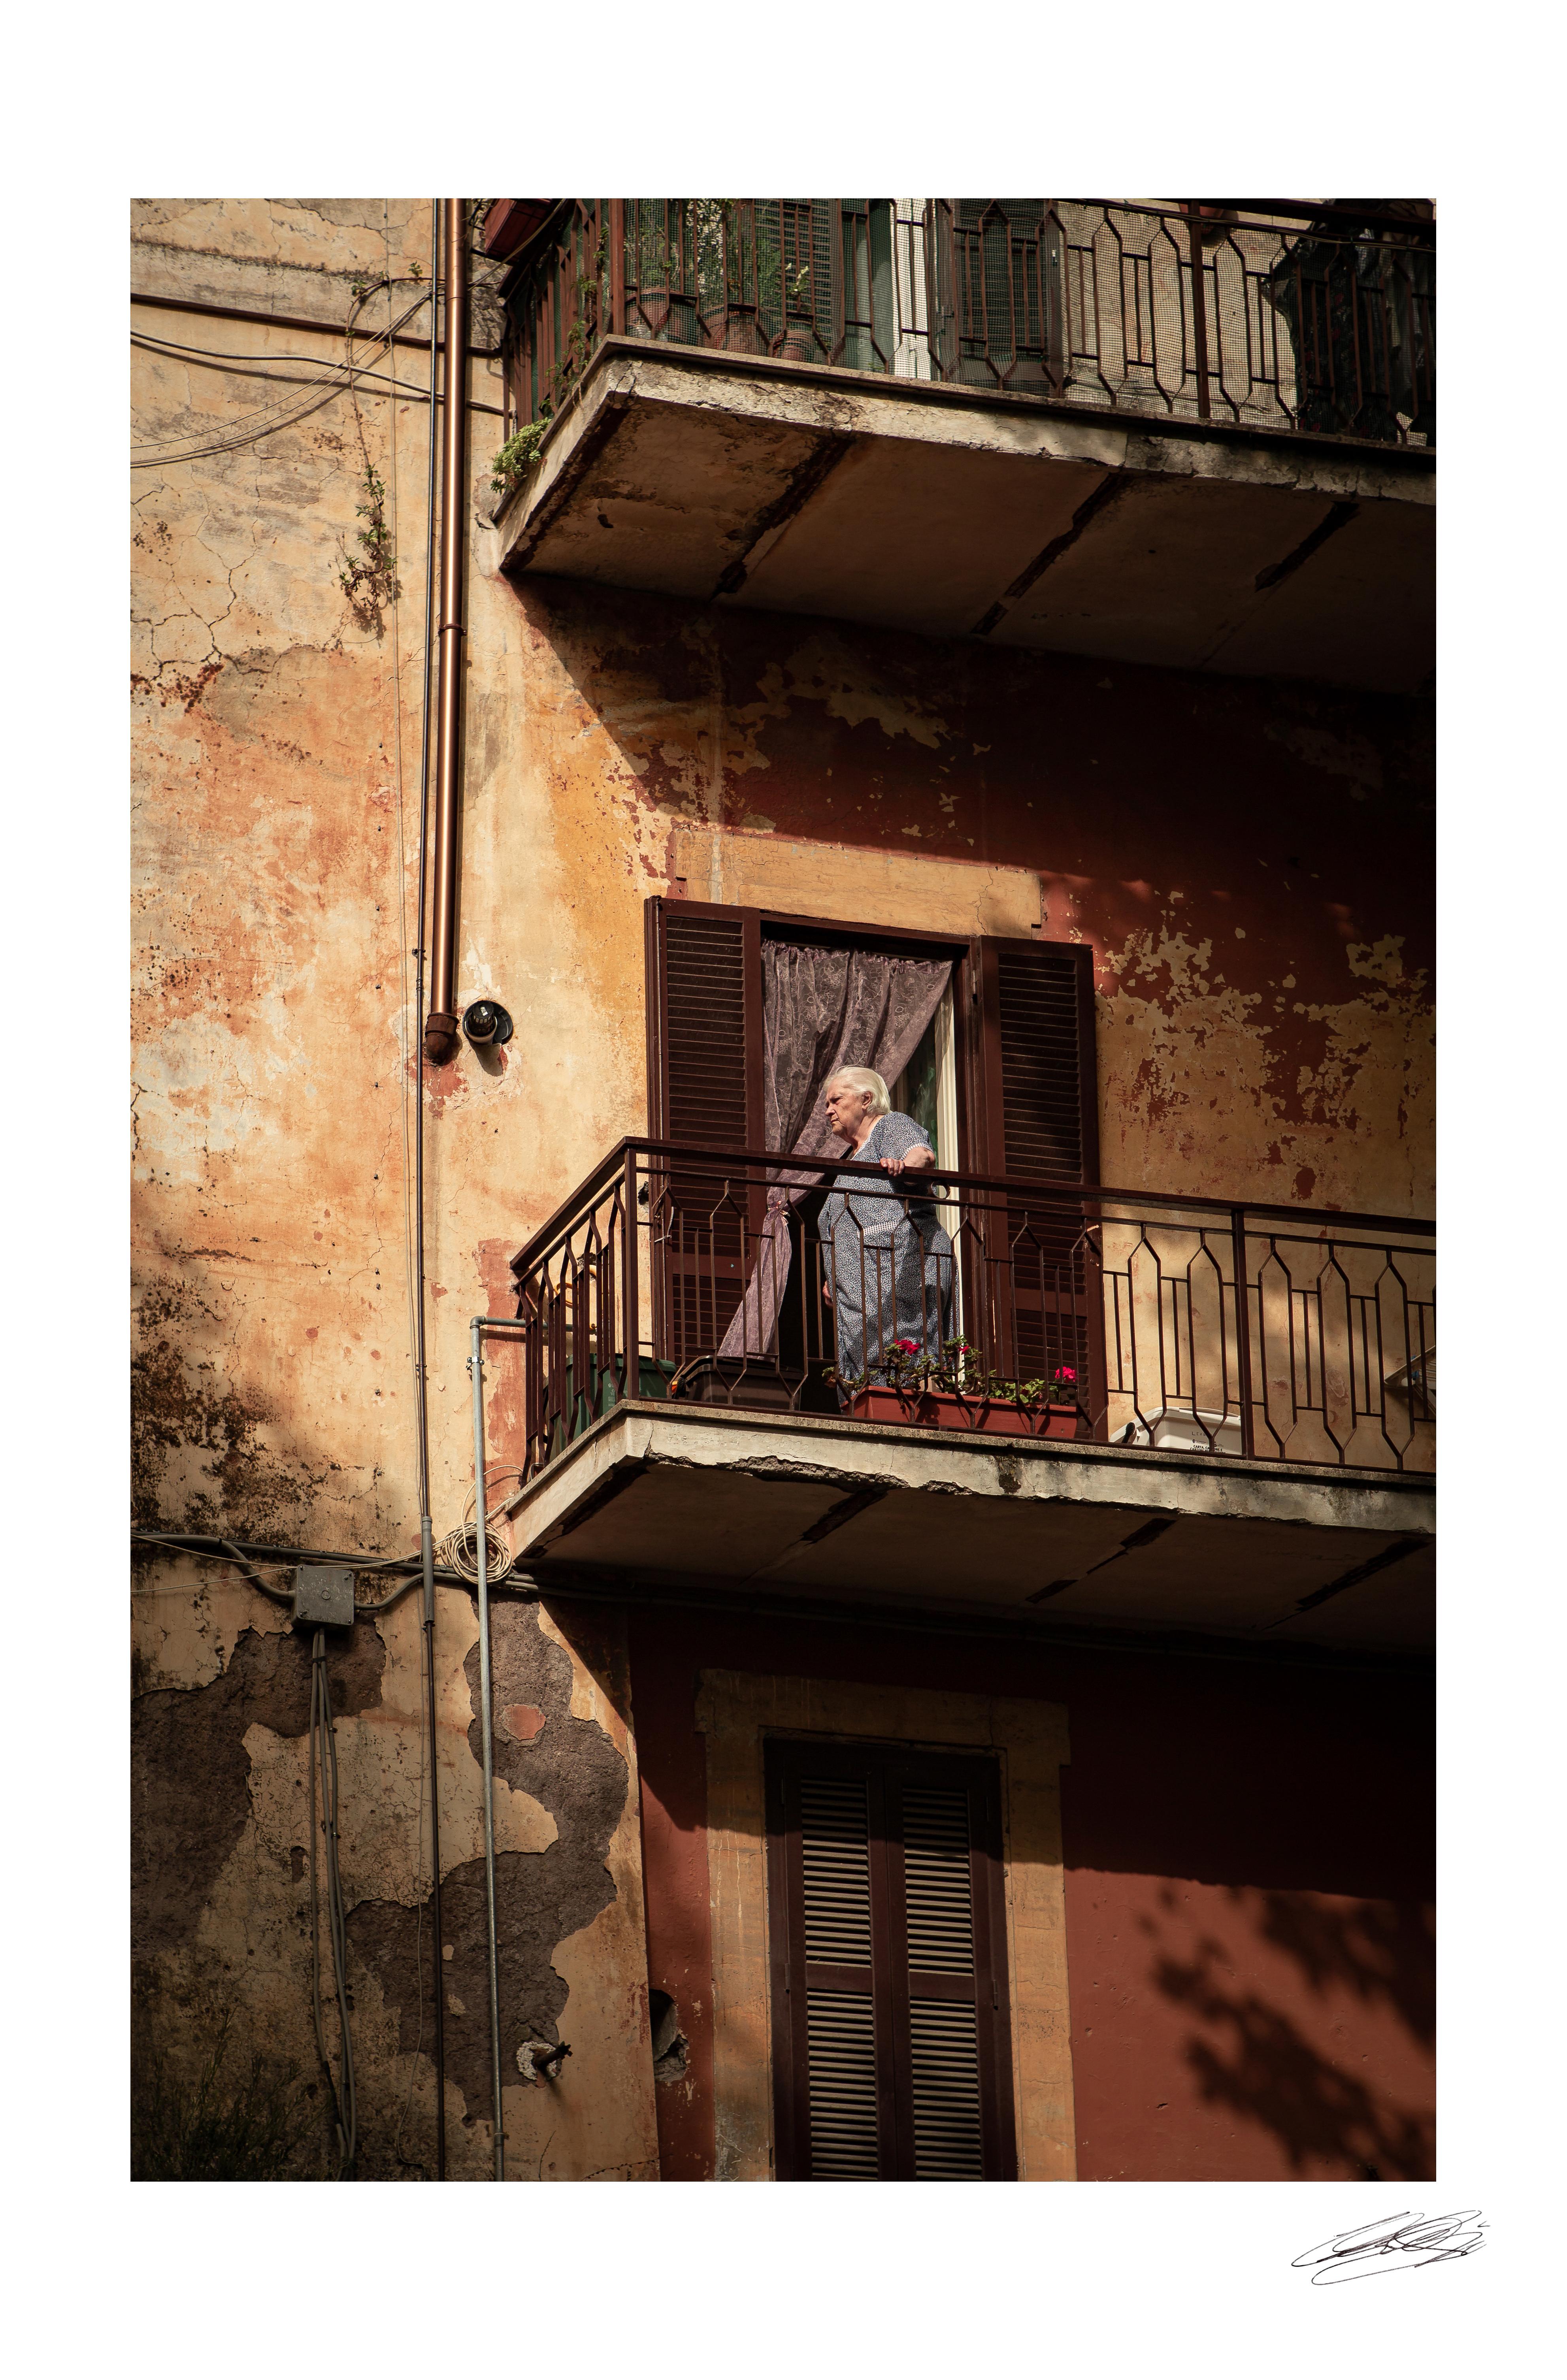 From the balcony is one of the best photo realized by the italian artist Carlo Caboni in 2020.

Always passionate about landscapes and photography, the artist then devoted himself to landscaping. He greatly admires the beauty of the landscapes